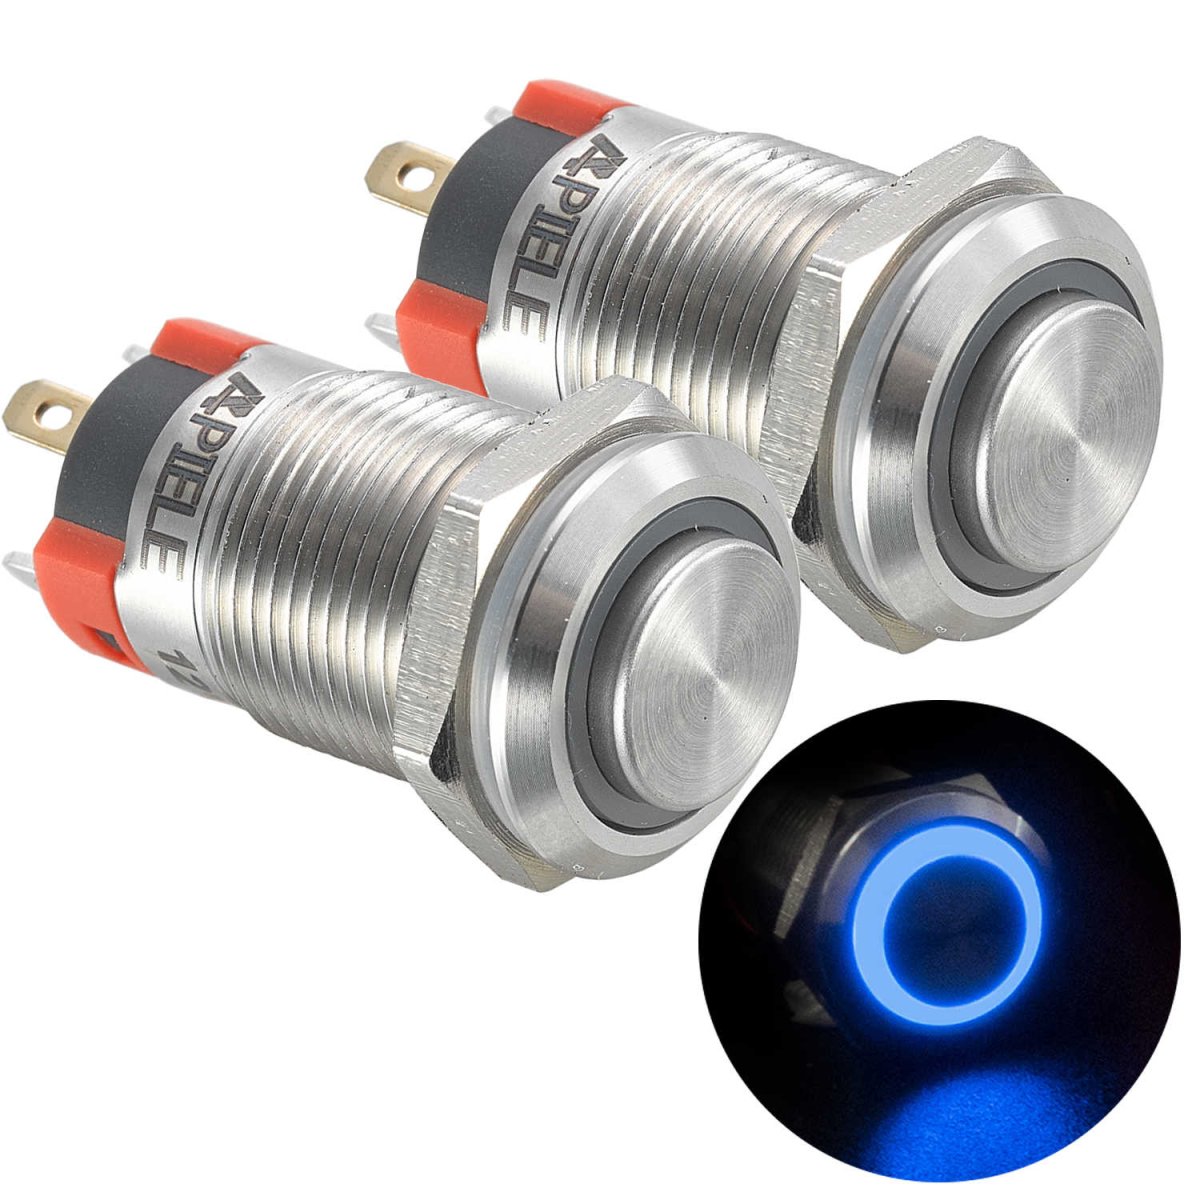 12mm Latching/Momentary Push Button Switch High Head Stainless Steel with Ring Led IP65 Waterproof (Pcs of 2) Customizable - Blue-Latching